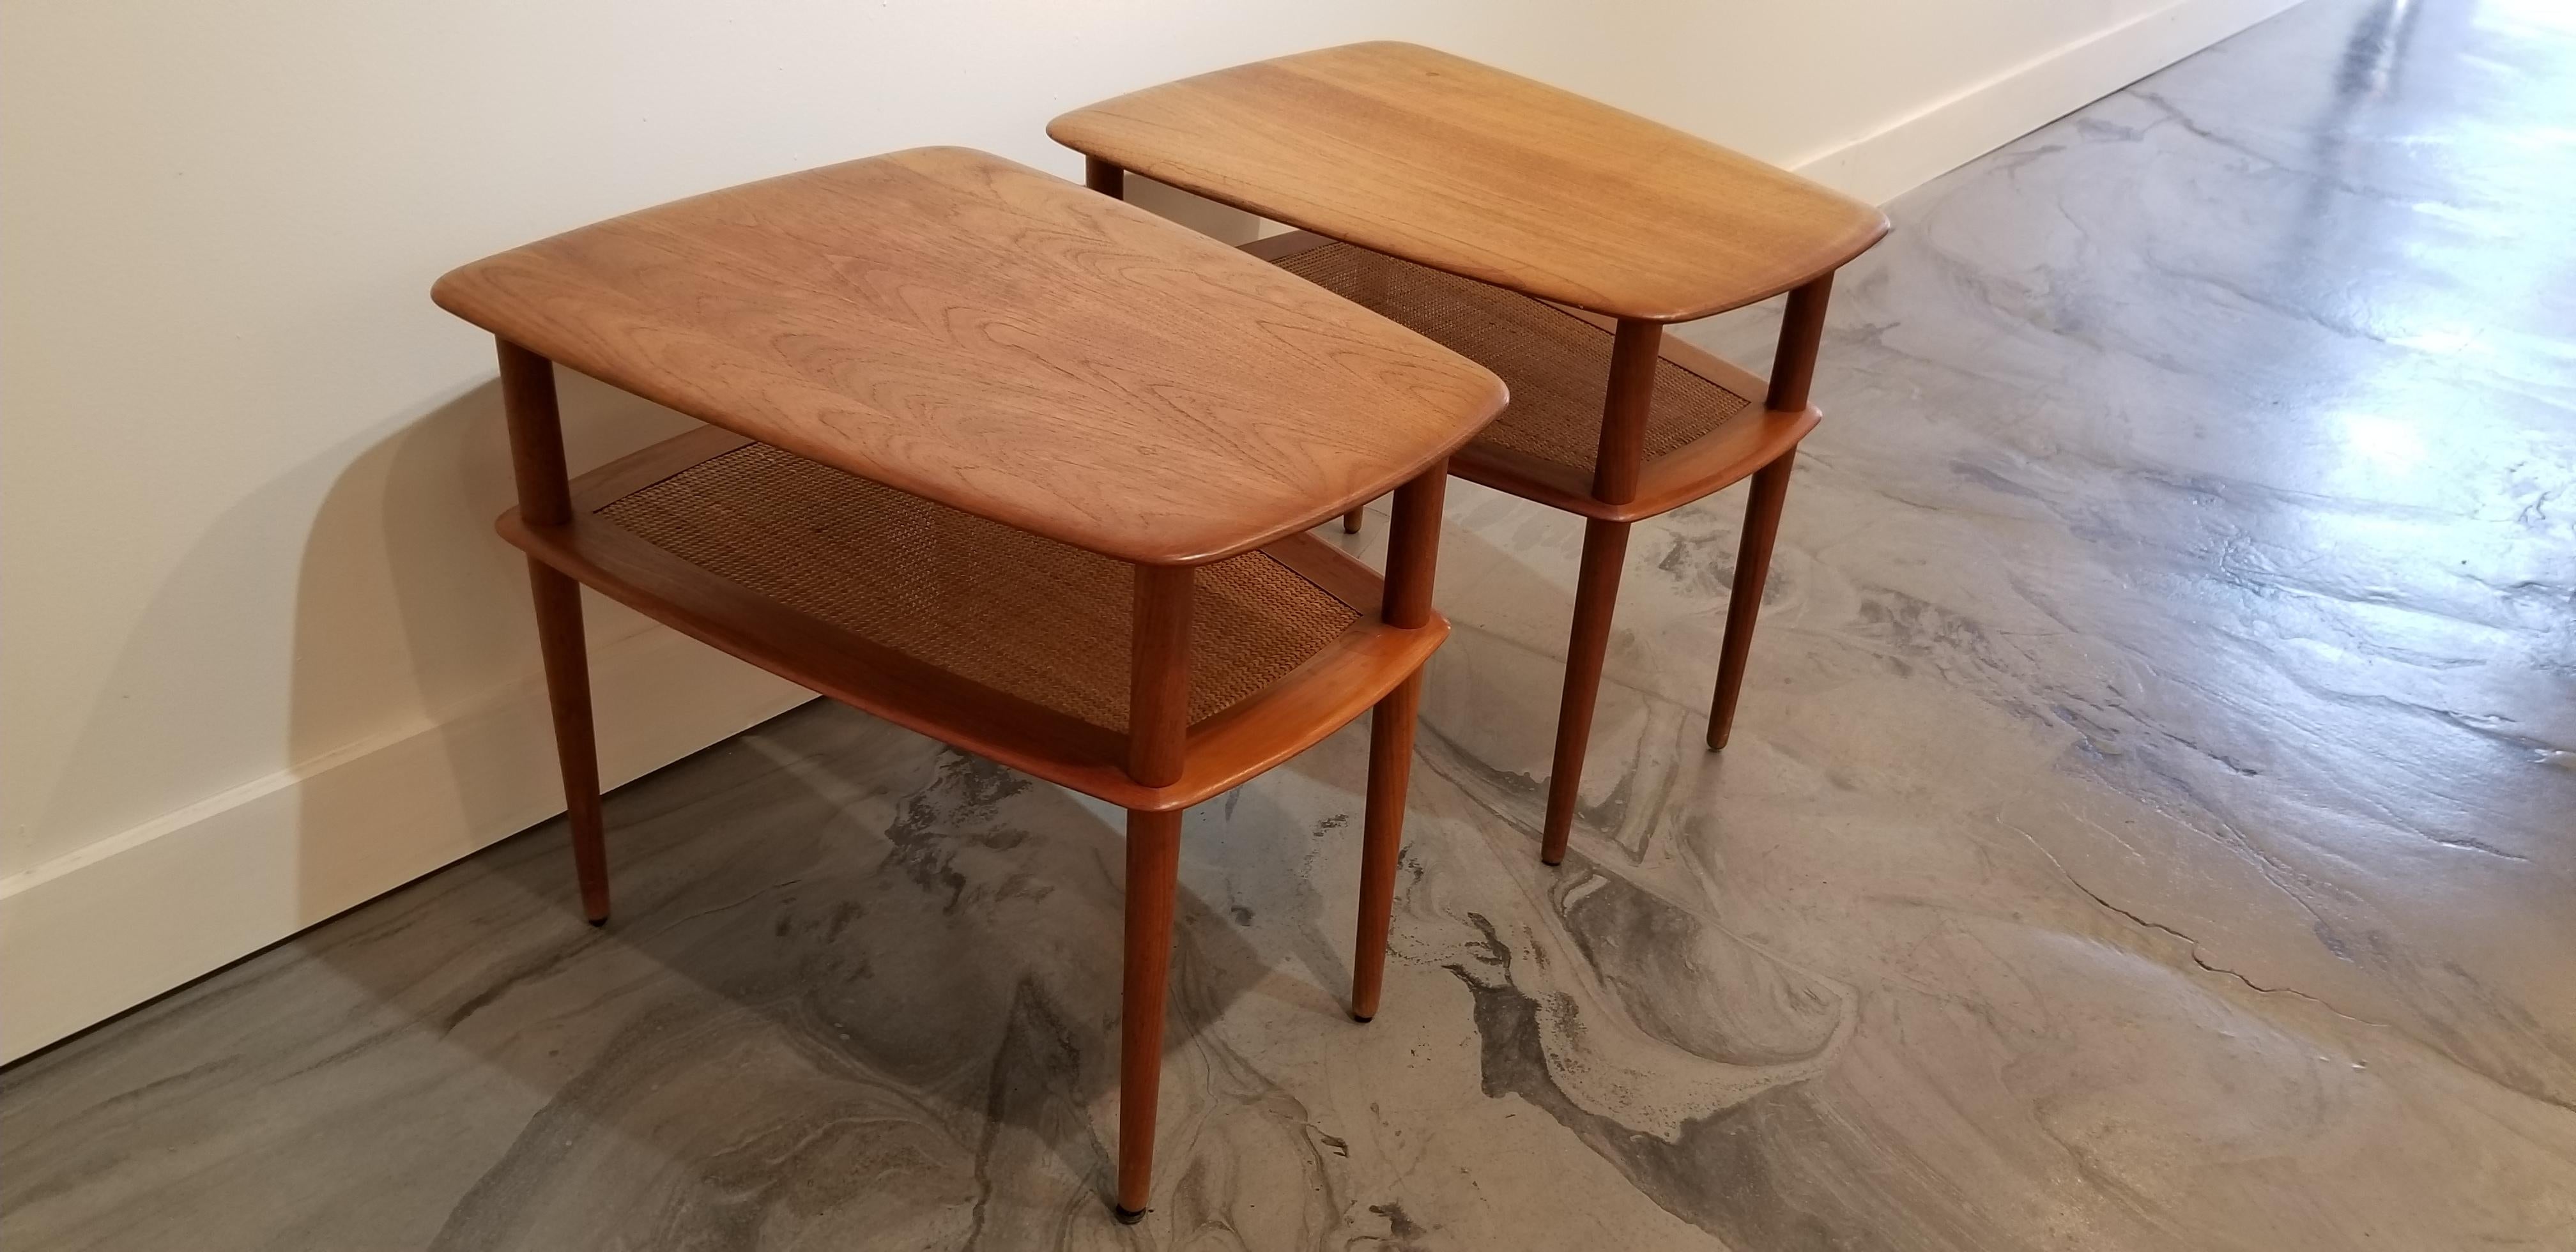 A pair of teak Danish Modern end tables designed by Peter Hvidt for France and Son. Crafted in solid teak with a woven cane magazine shelf under tabletop. Conical legs and woven wicker detail. Tables are in good, original vintage condition with